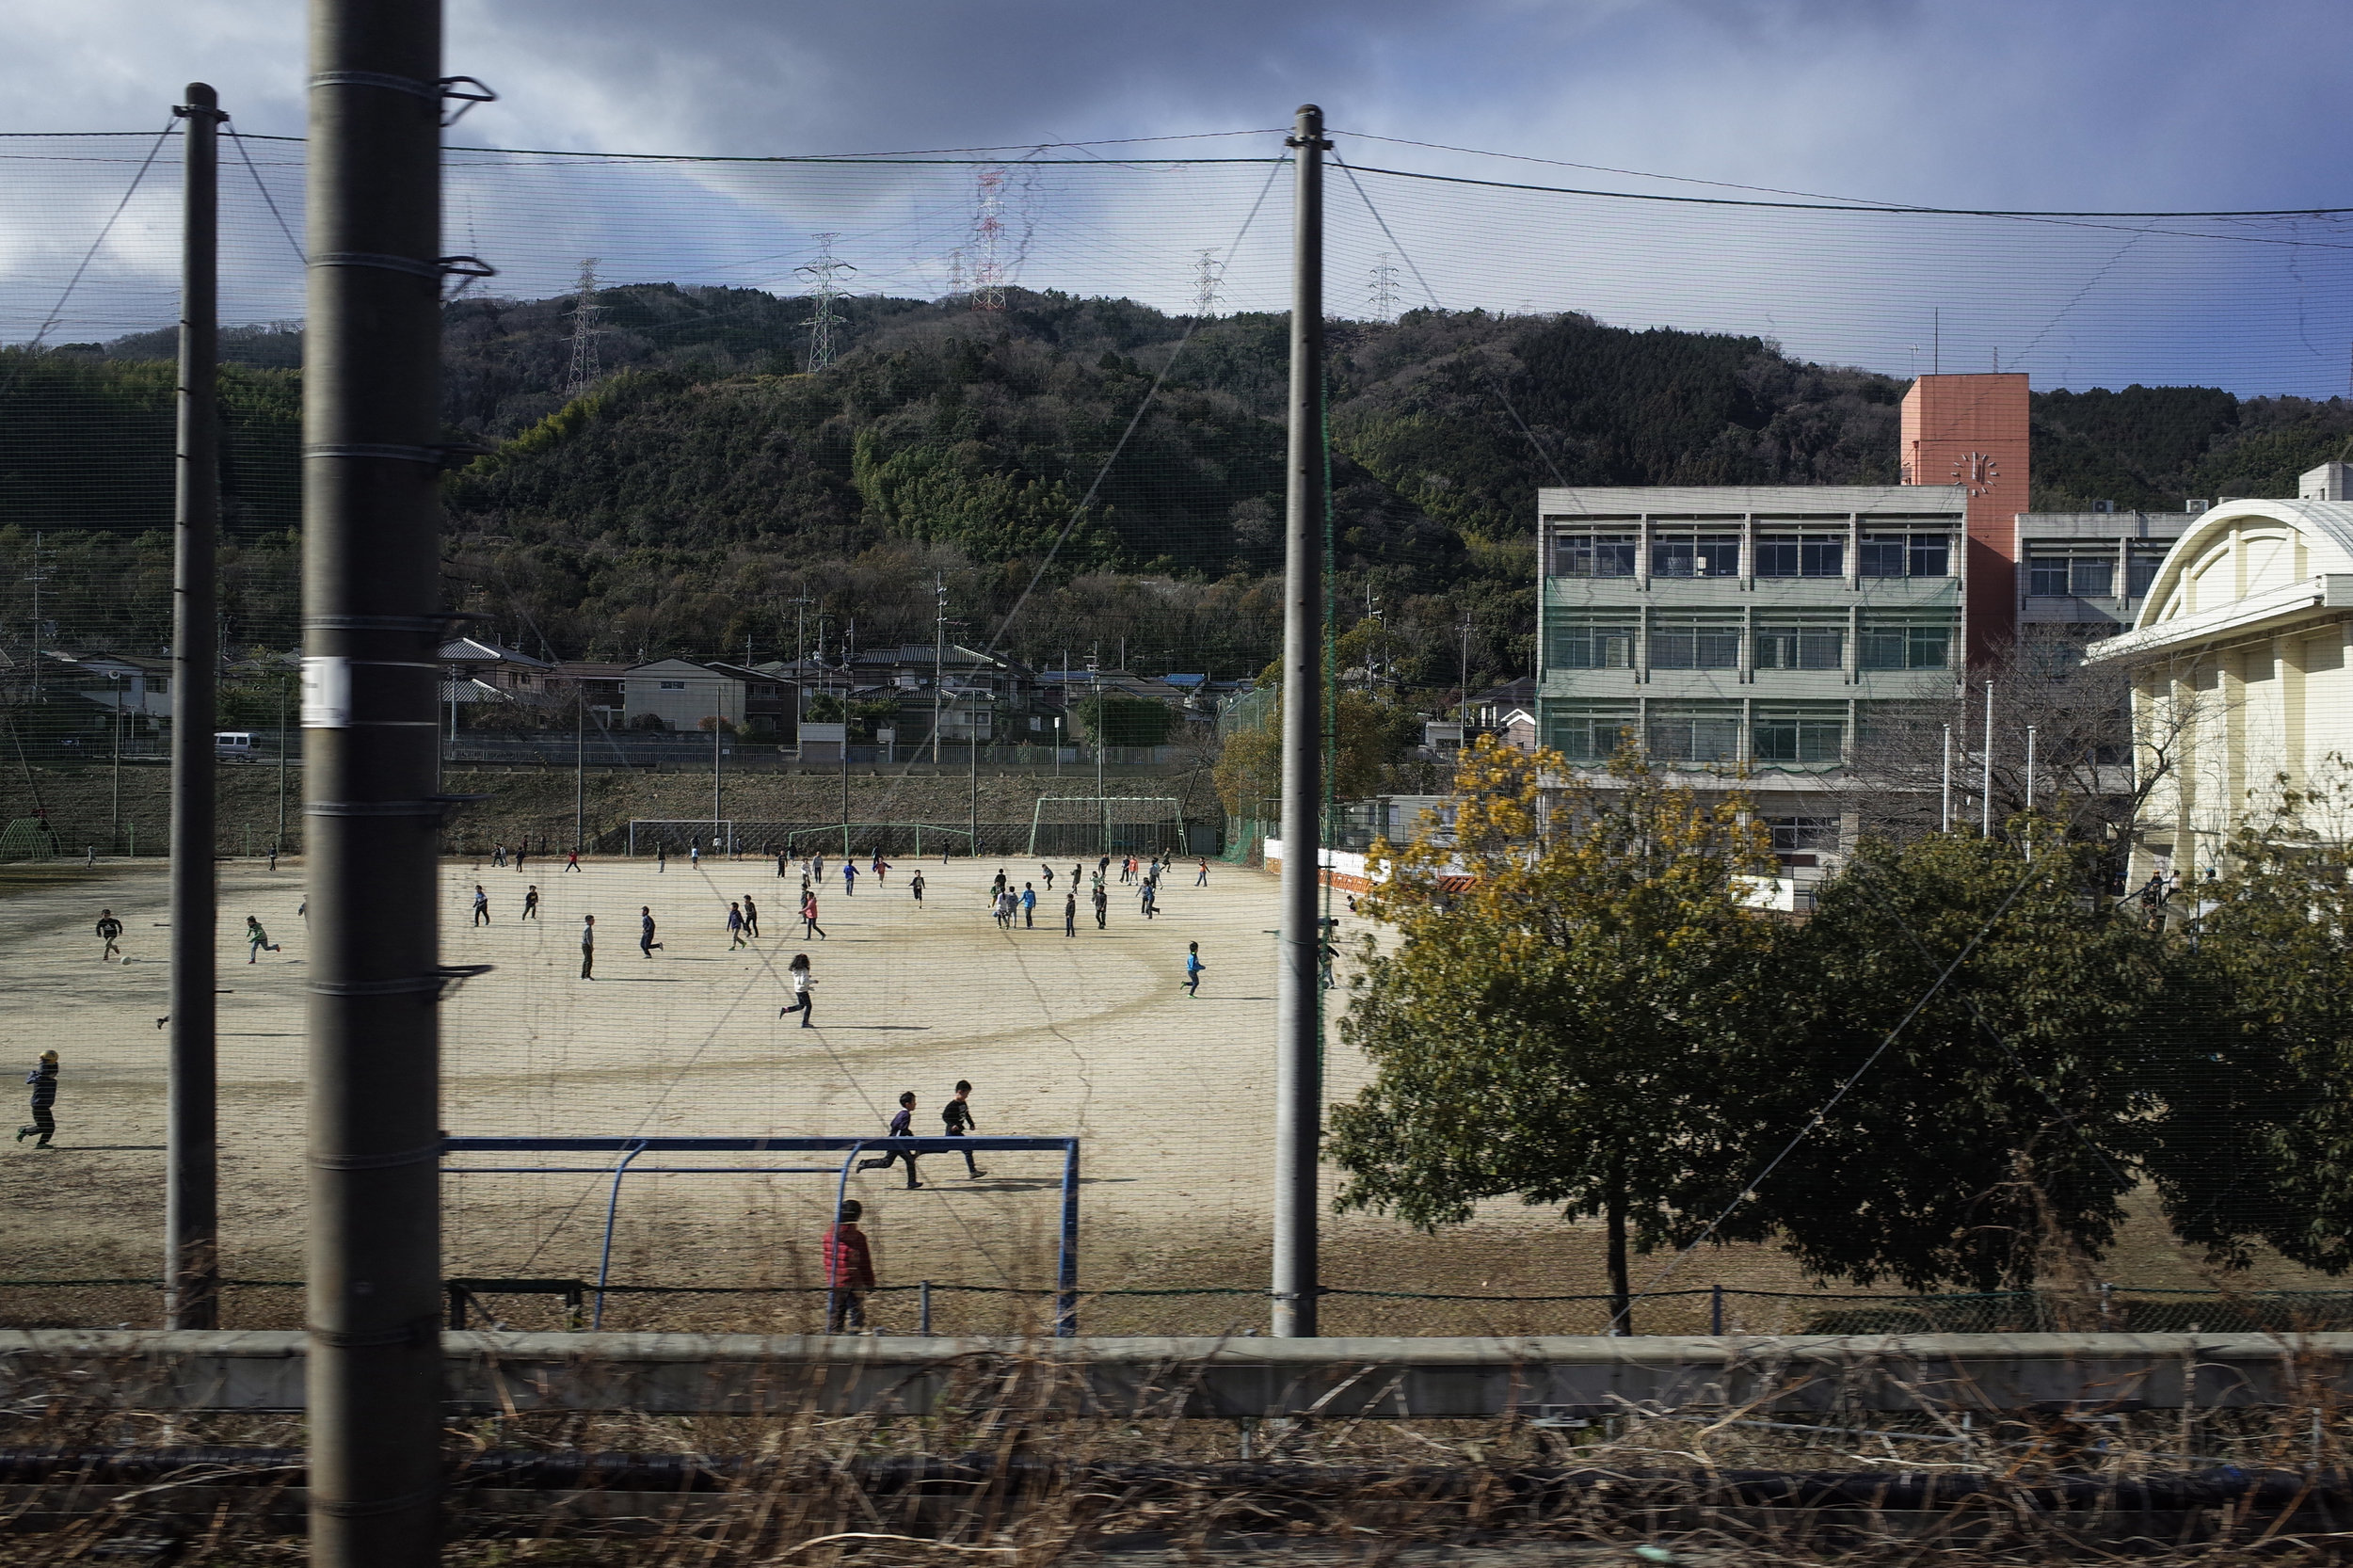  Schoolchildren at play in Shimamoto Choritsu Daisan Elementary School in Shimamoto, Osaka, Japan (Picture was taken from the window seat of an express train) 